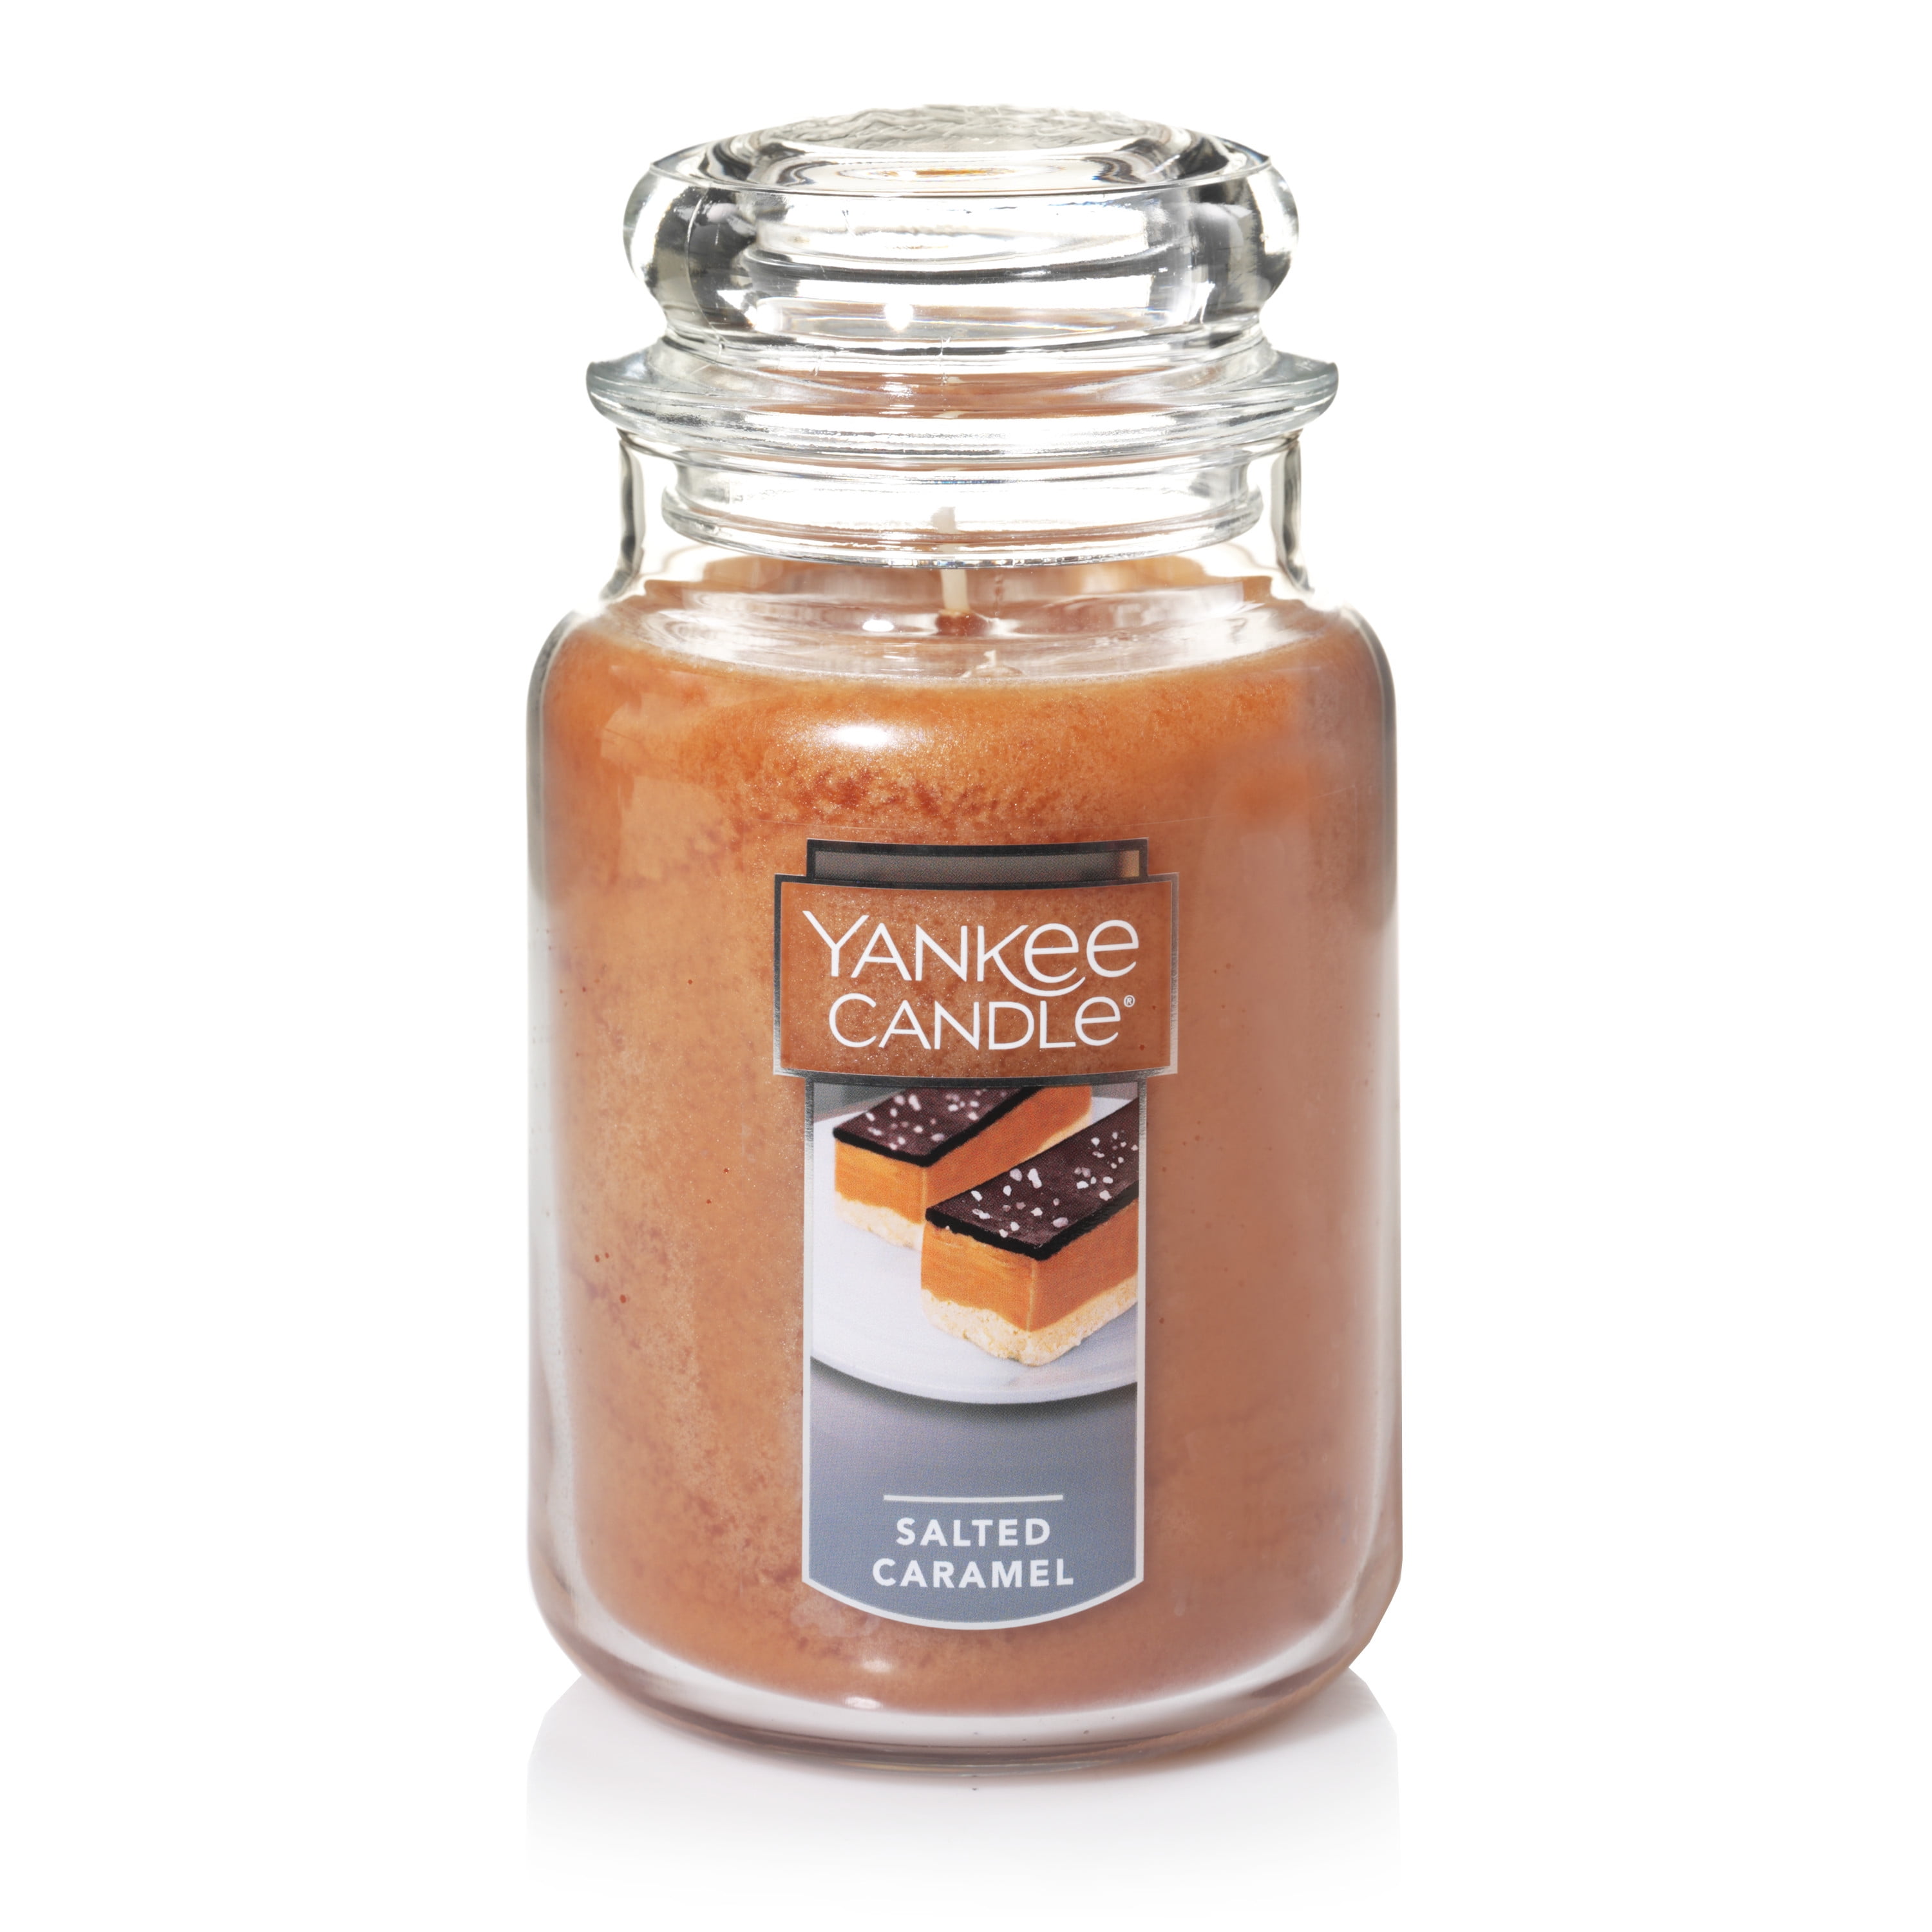 ☆☆HOT COCOA☆☆YANKEE CANDLE JAR~ FREE SHIPPING☆☆HOME INSPIRATION GREAT SCENT 